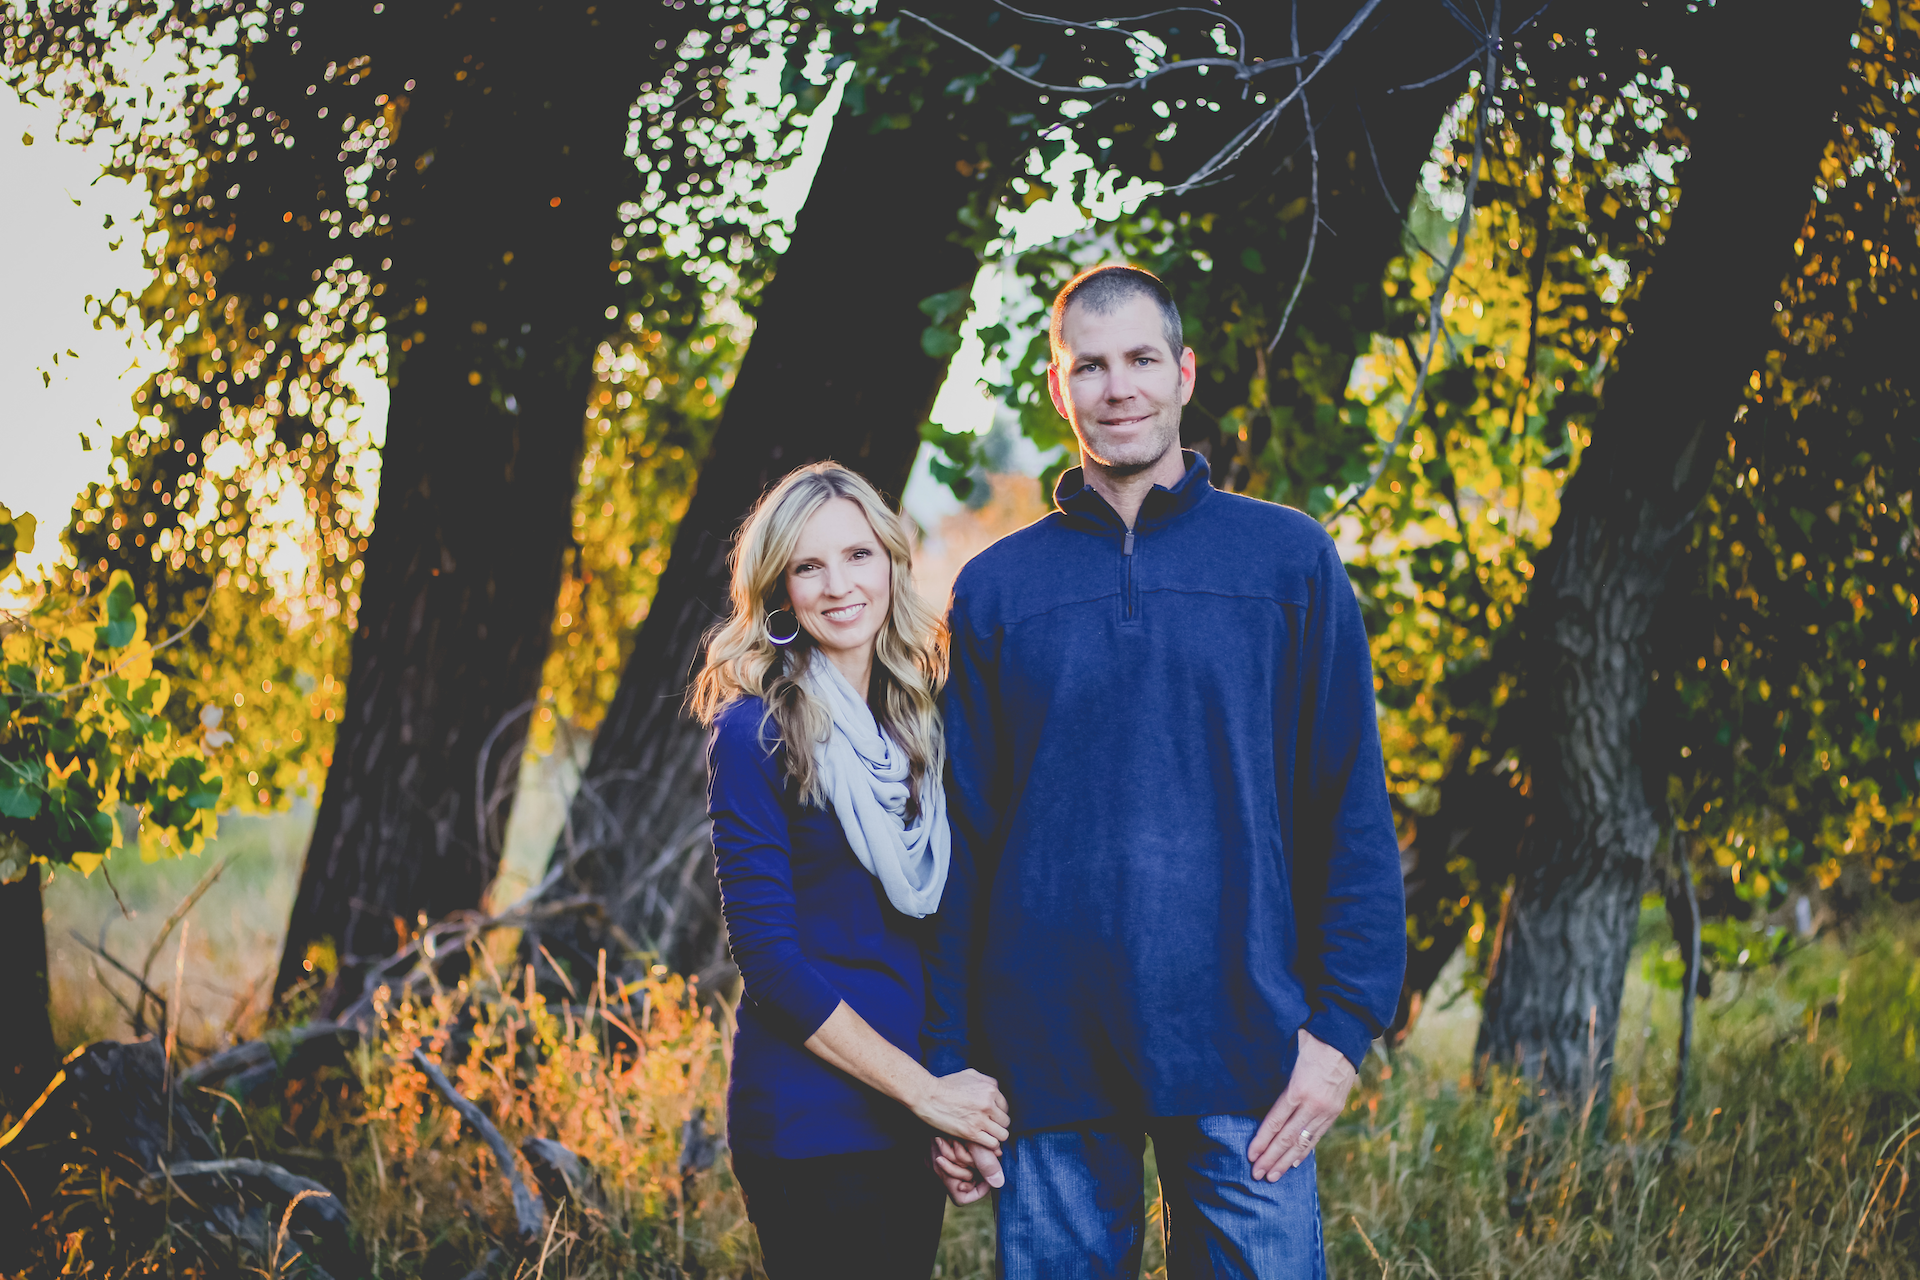 Thrive Relational recovery - Meet Rebecca and Jake Knudsen, Founders of an Addiction and Trauma Therapy Clinic in Centennial, CO